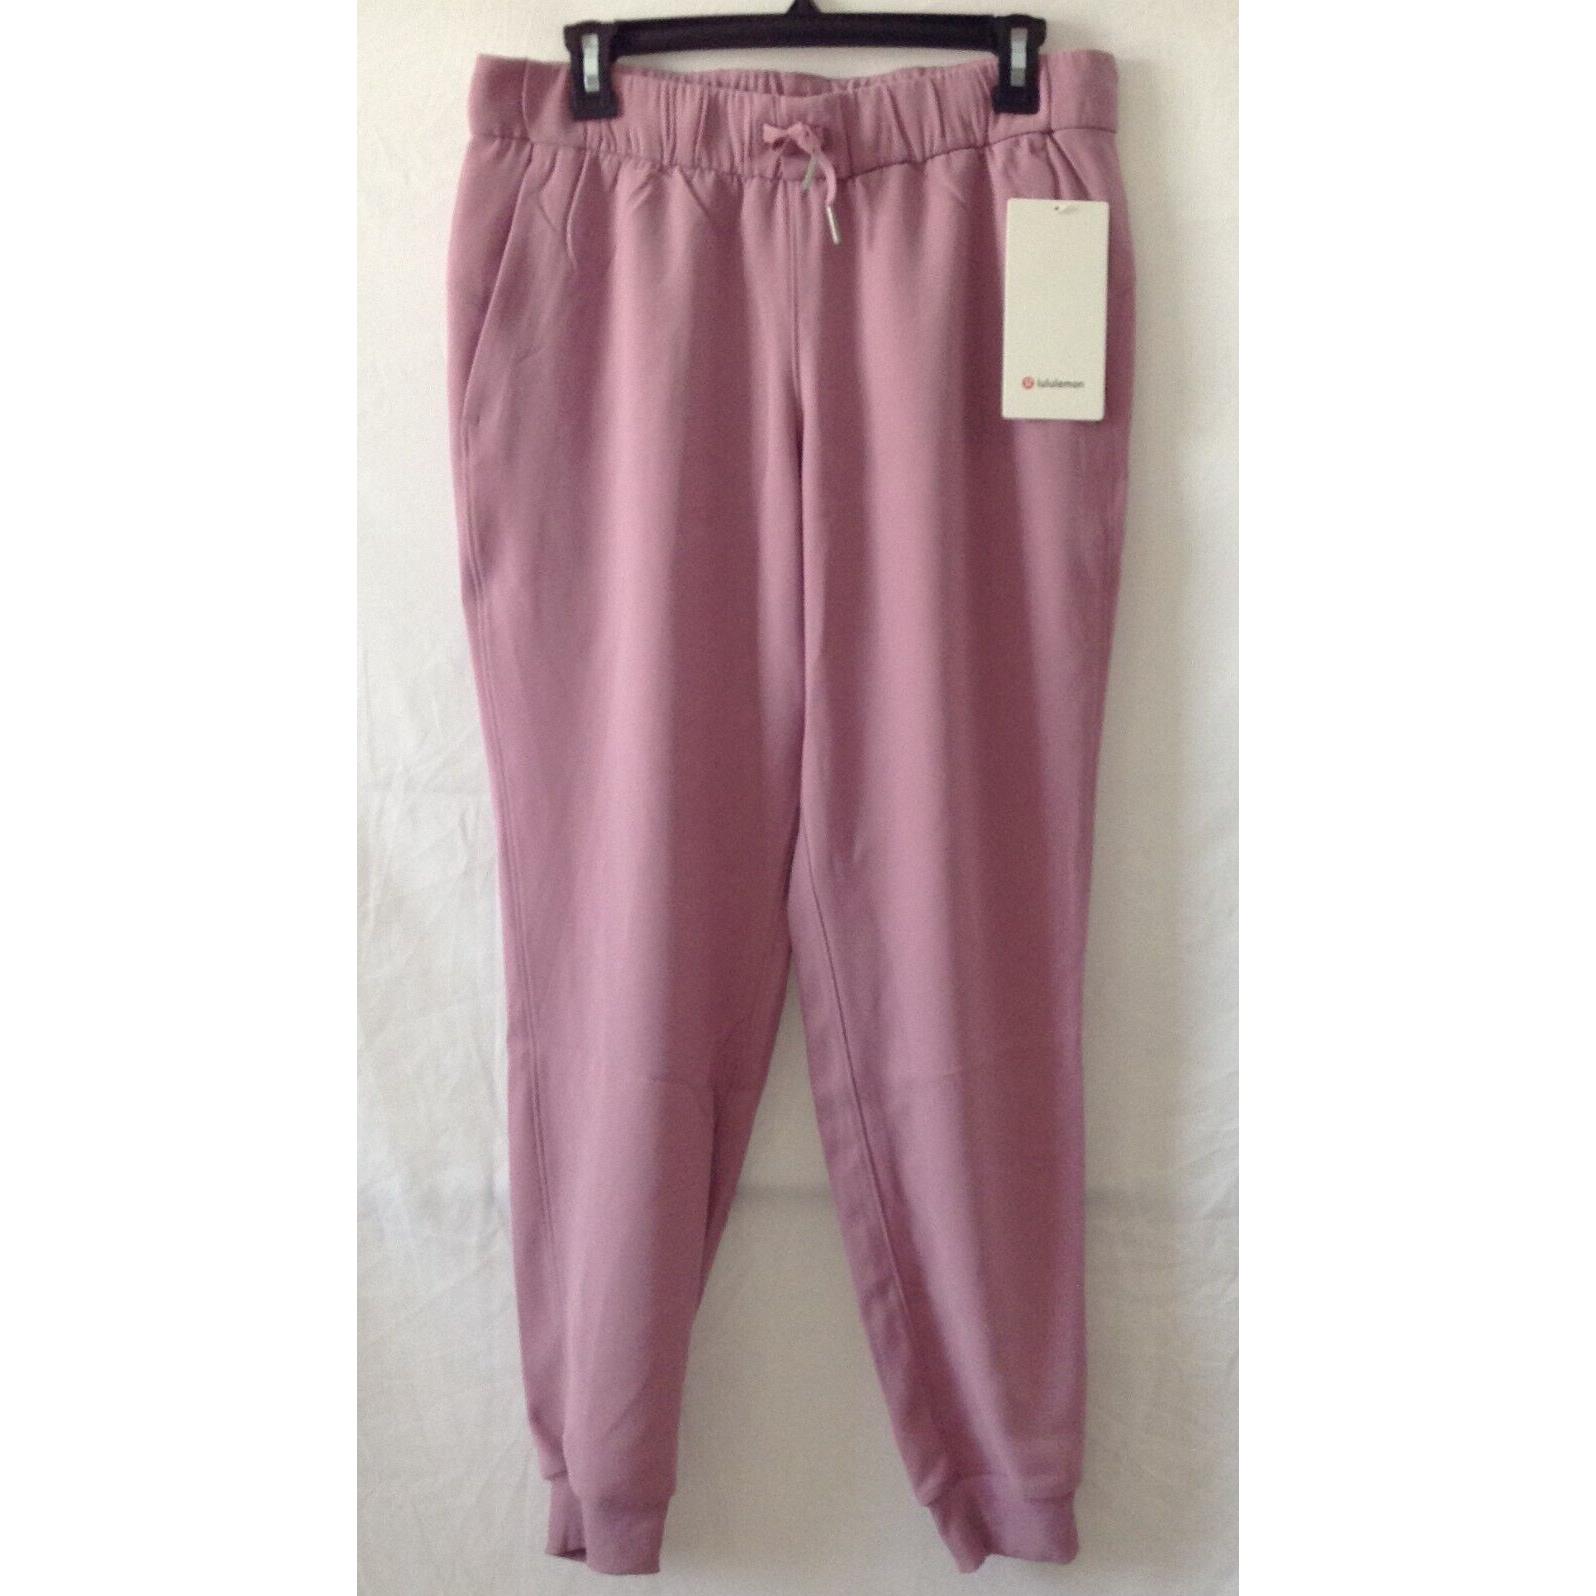 Lululemon On The Fly Jogger Woven Pink Taupe Women s Travel Size 8